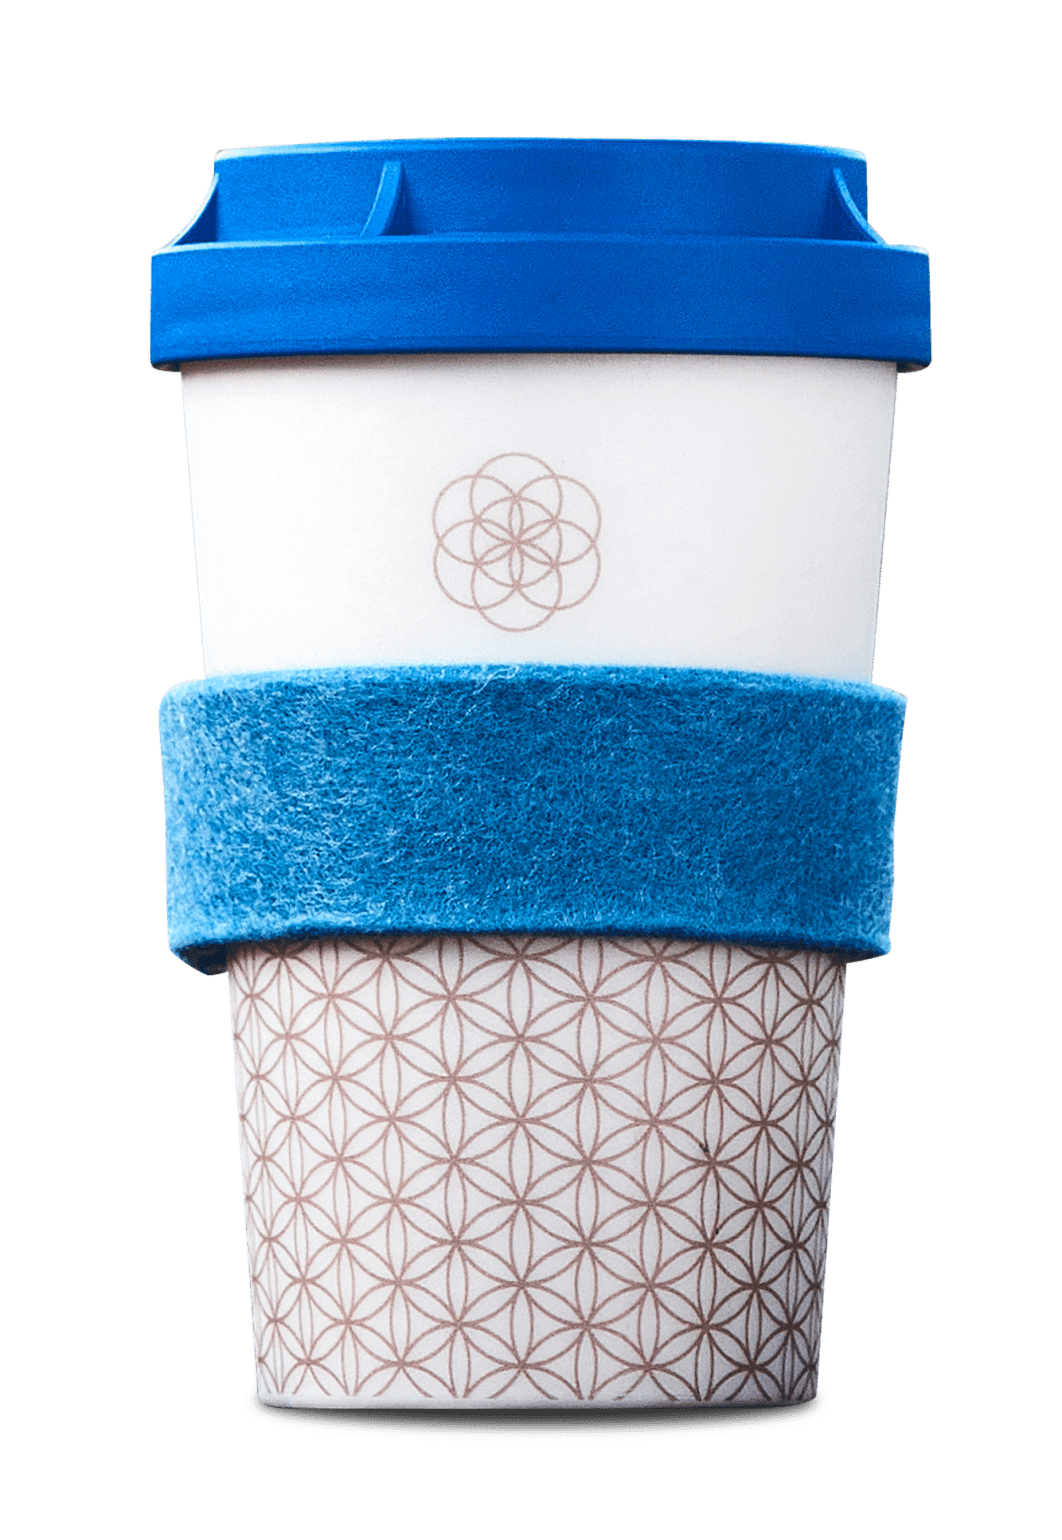 Bio-based and biodegradable materials for the production of sustainable lifestyle cups.